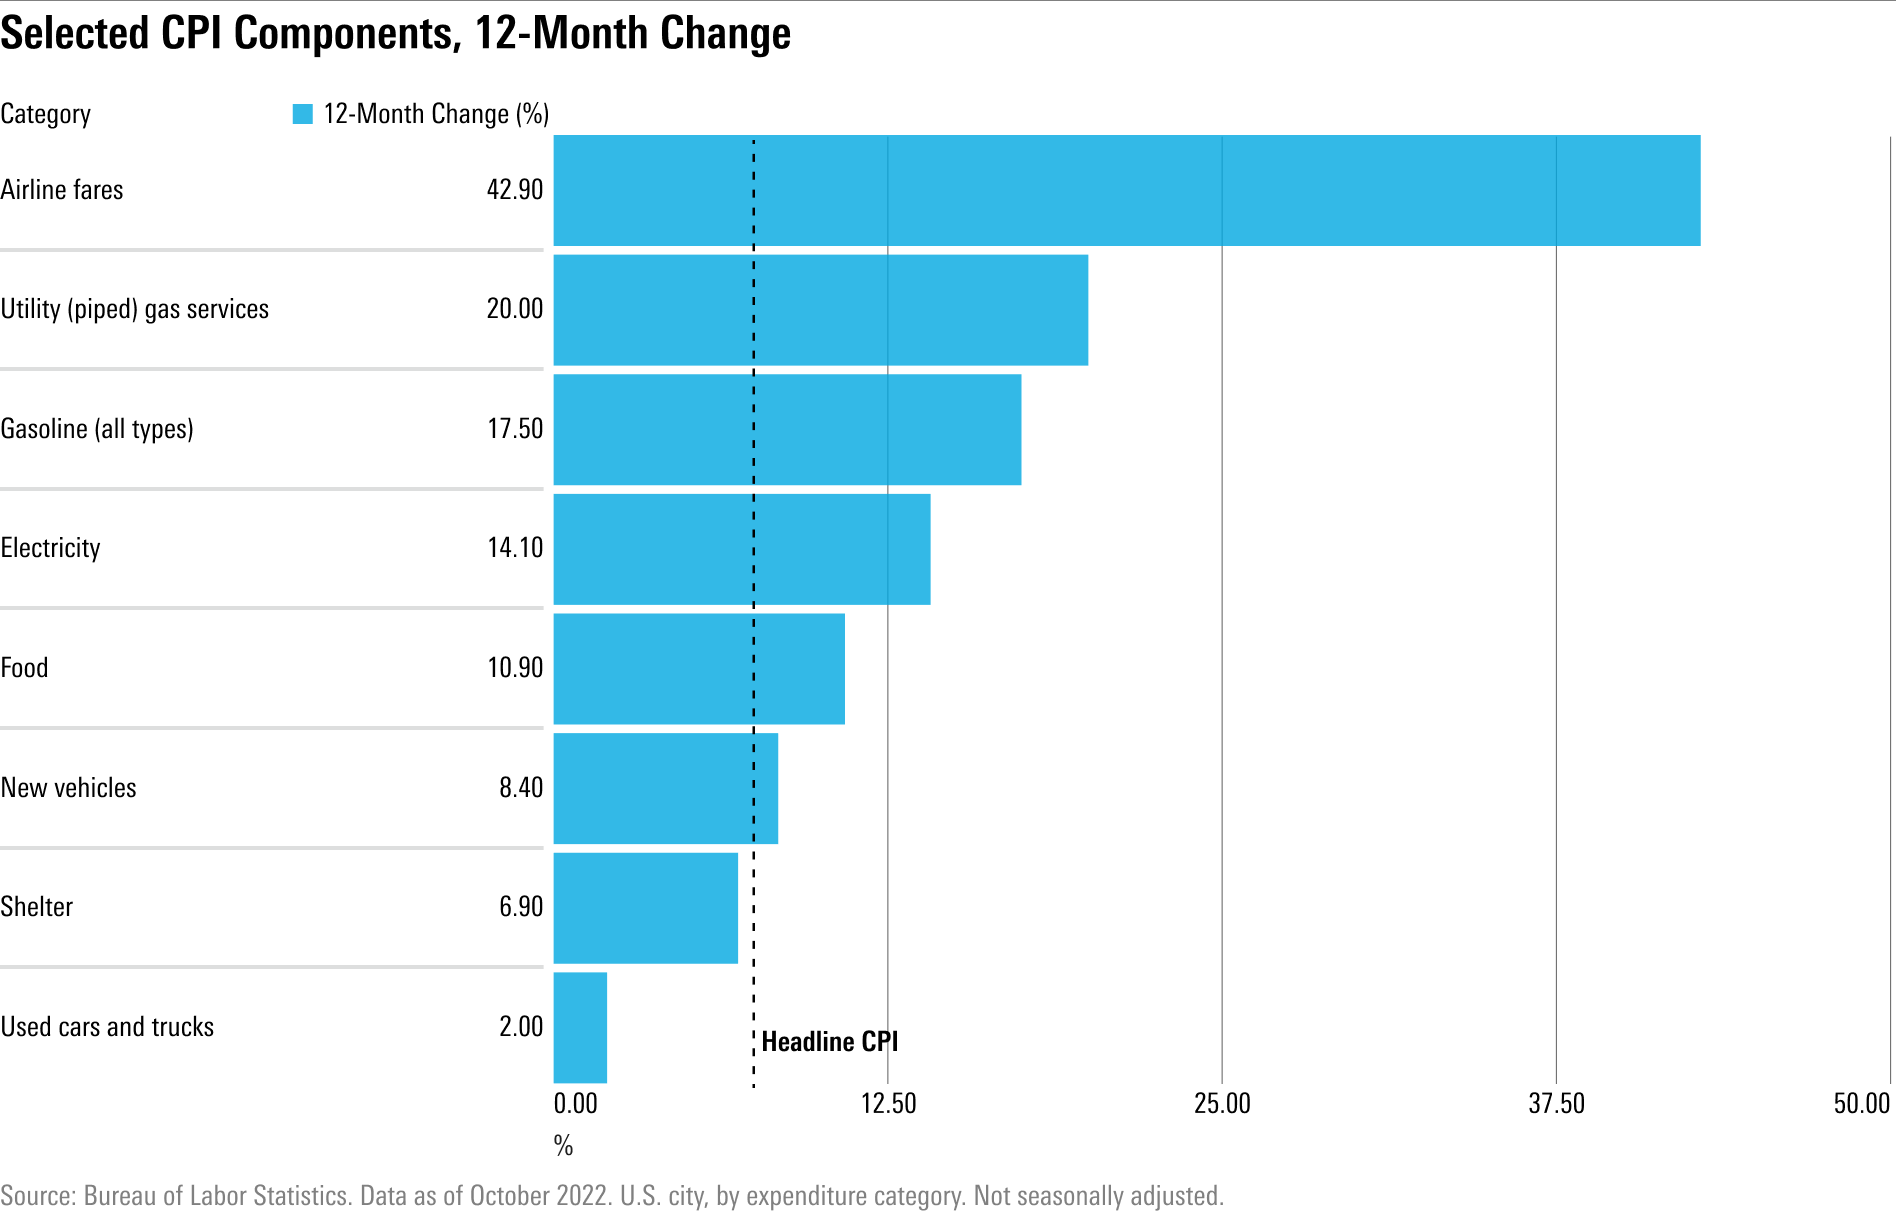 Horizontal bar chart showing 12-Month change in key CPI components.